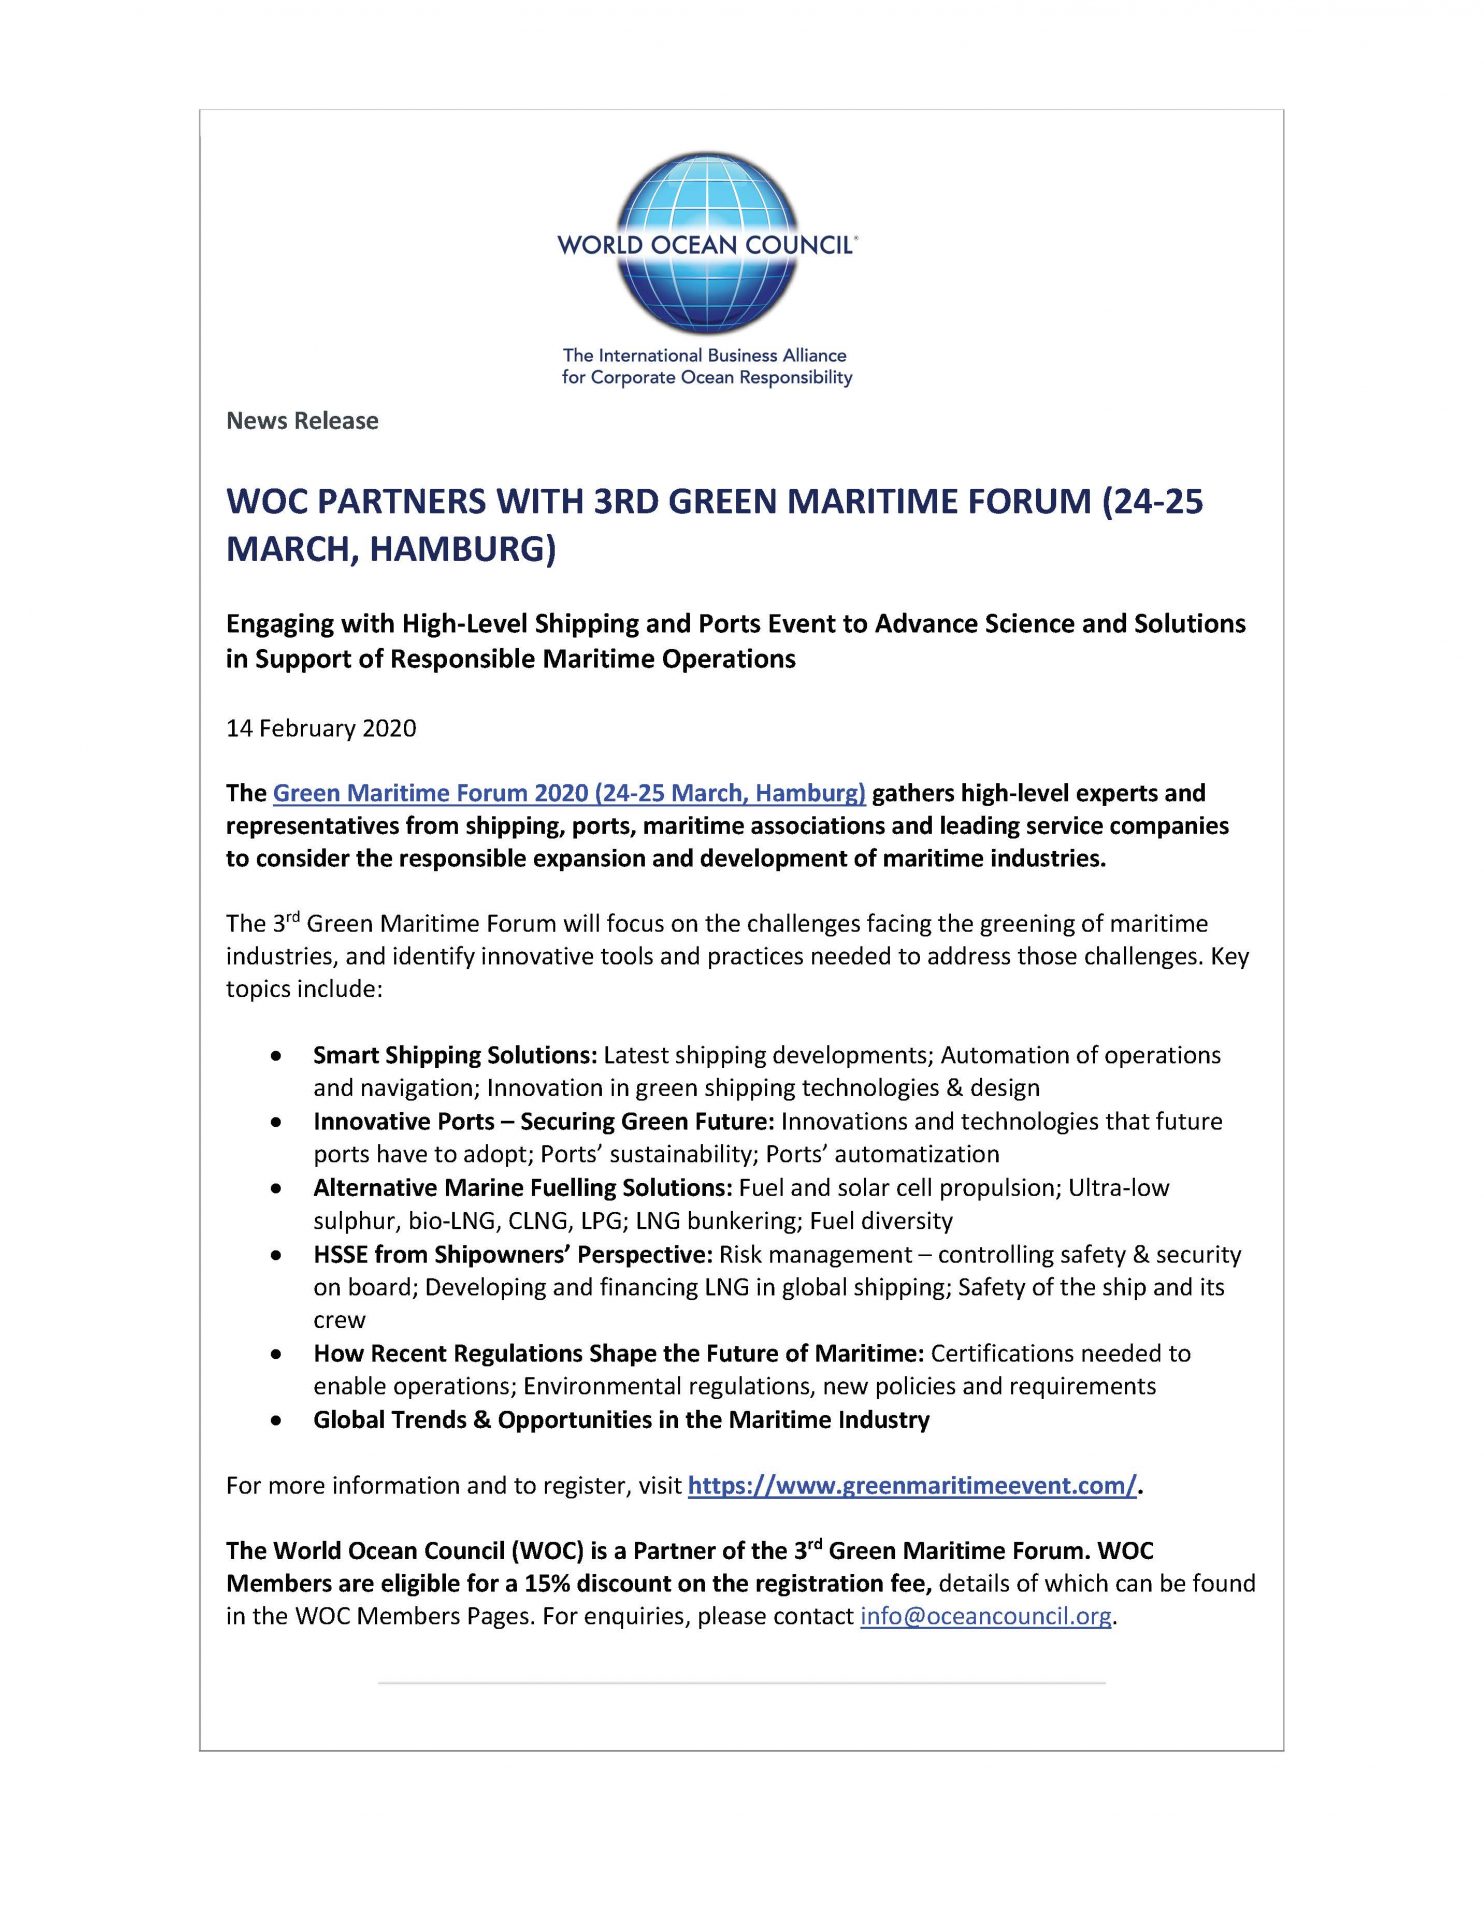 WOC Partners With 3rd Green Maritime Forum (24-25 March, Hamburg) - 14 February 2020